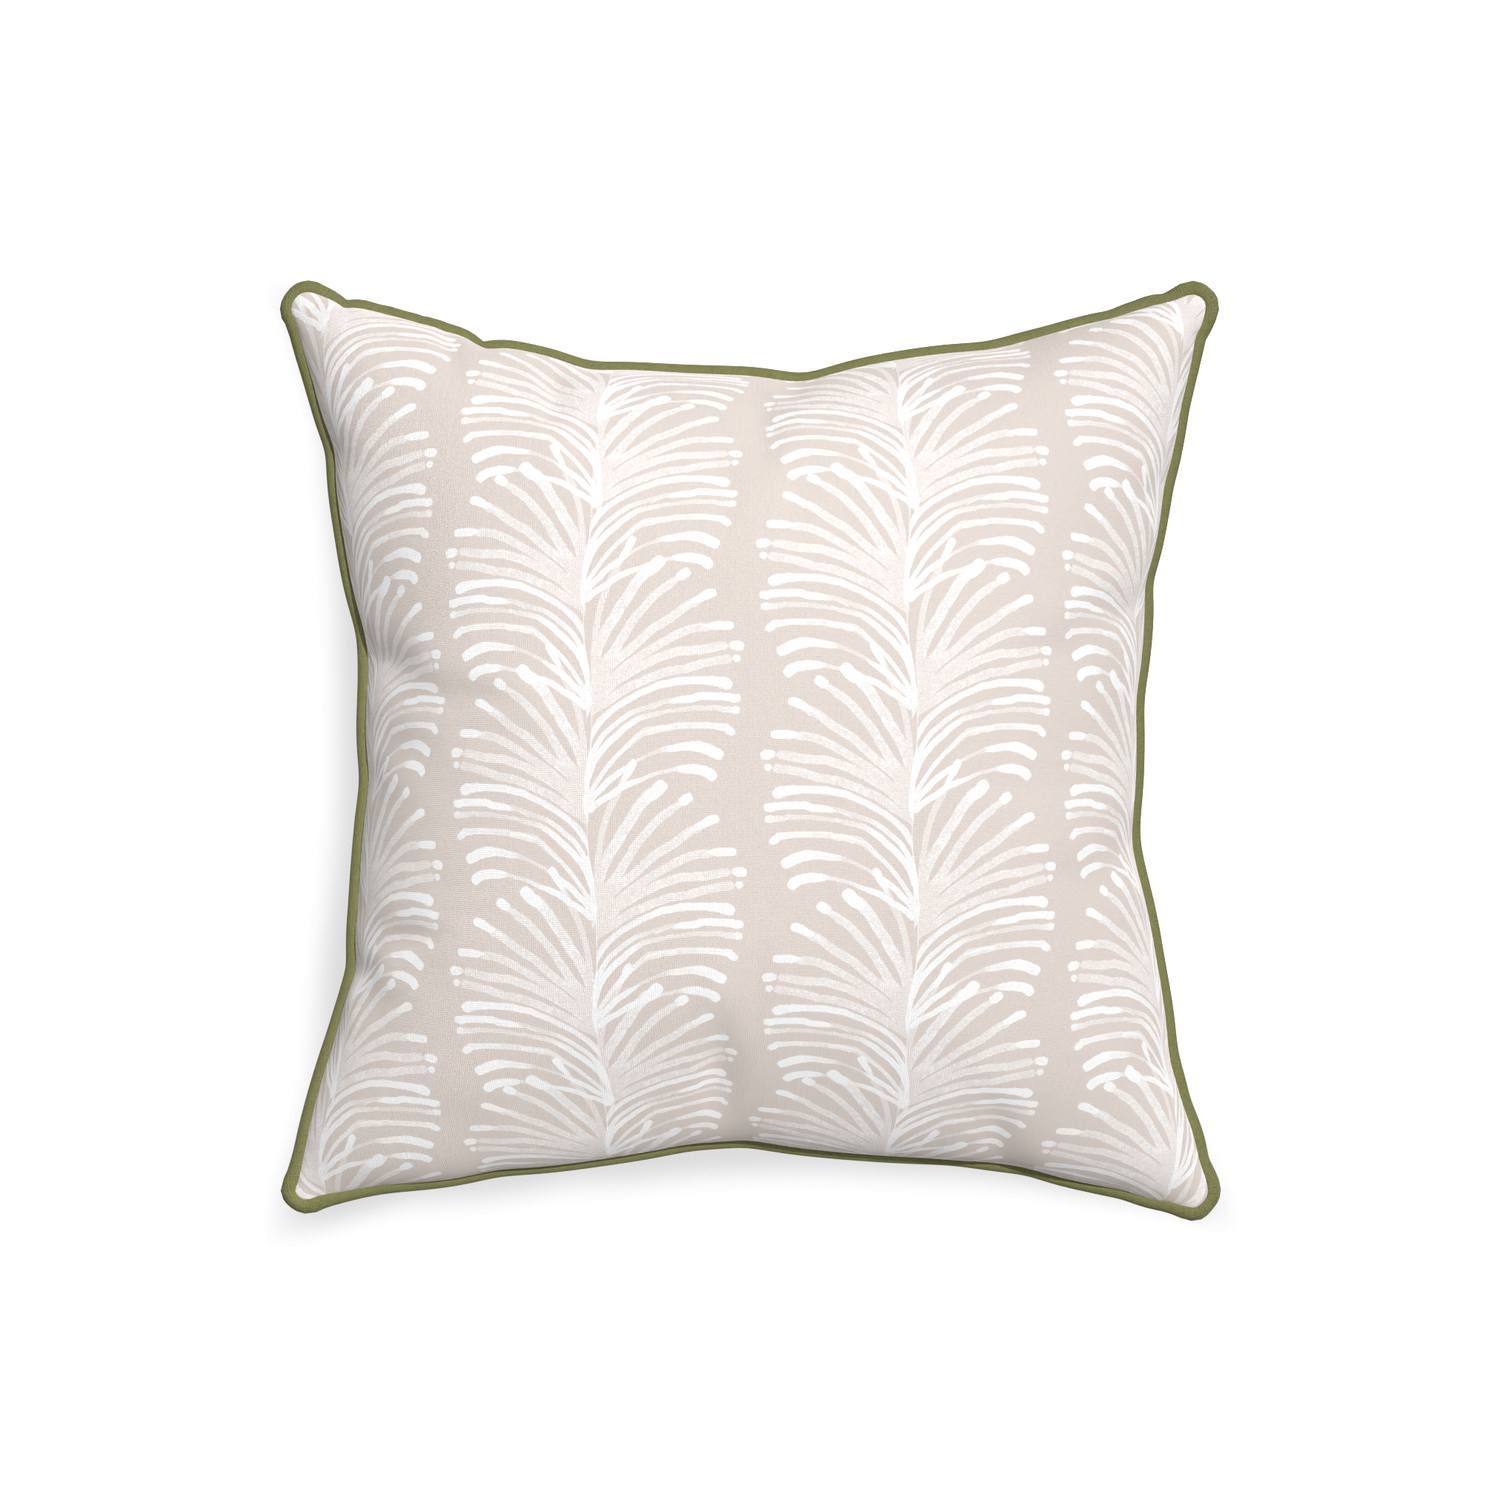 20-square emma sand custom sand colored botanical stripepillow with moss piping on white background